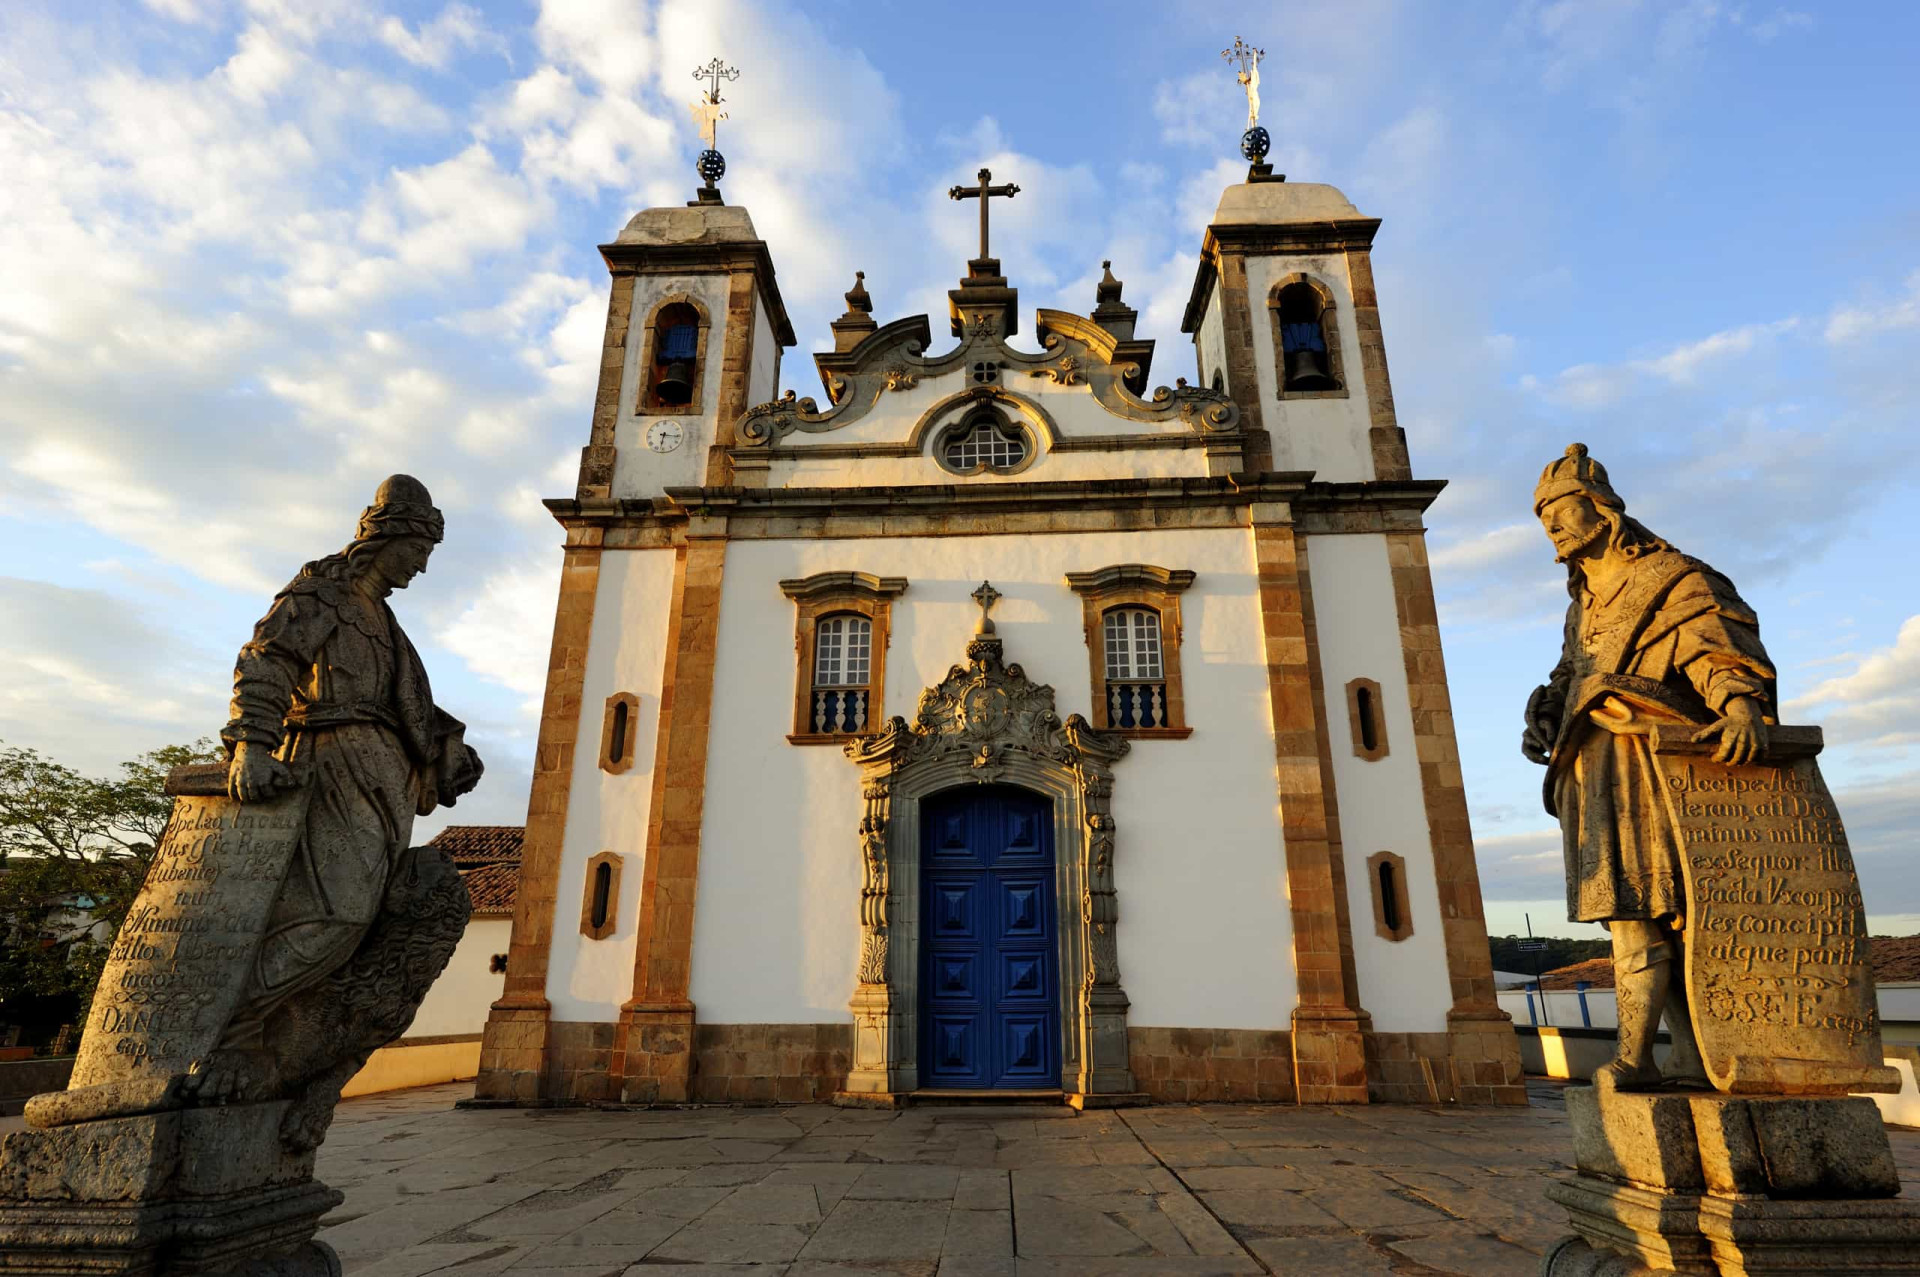 <p>Location: Congonhas<br>Criteria: Cultural<br>Year established: 1985<br>Description: Commissioned by the Portuguese in the 18th century and designed by sculptor and architect Aleijadinho, the sanctuary's basilica features 12 sculptures of old testament prophets around the terrace.</p><p><a href="https://www.msn.com/en-us/community/channel/vid-7xx8mnucu55yw63we9va2gwr7uihbxwc68fxqp25x6tg4ftibpra?cvid=94631541bc0f4f89bfd59158d696ad7e">Follow us and access great exclusive content every day</a></p>